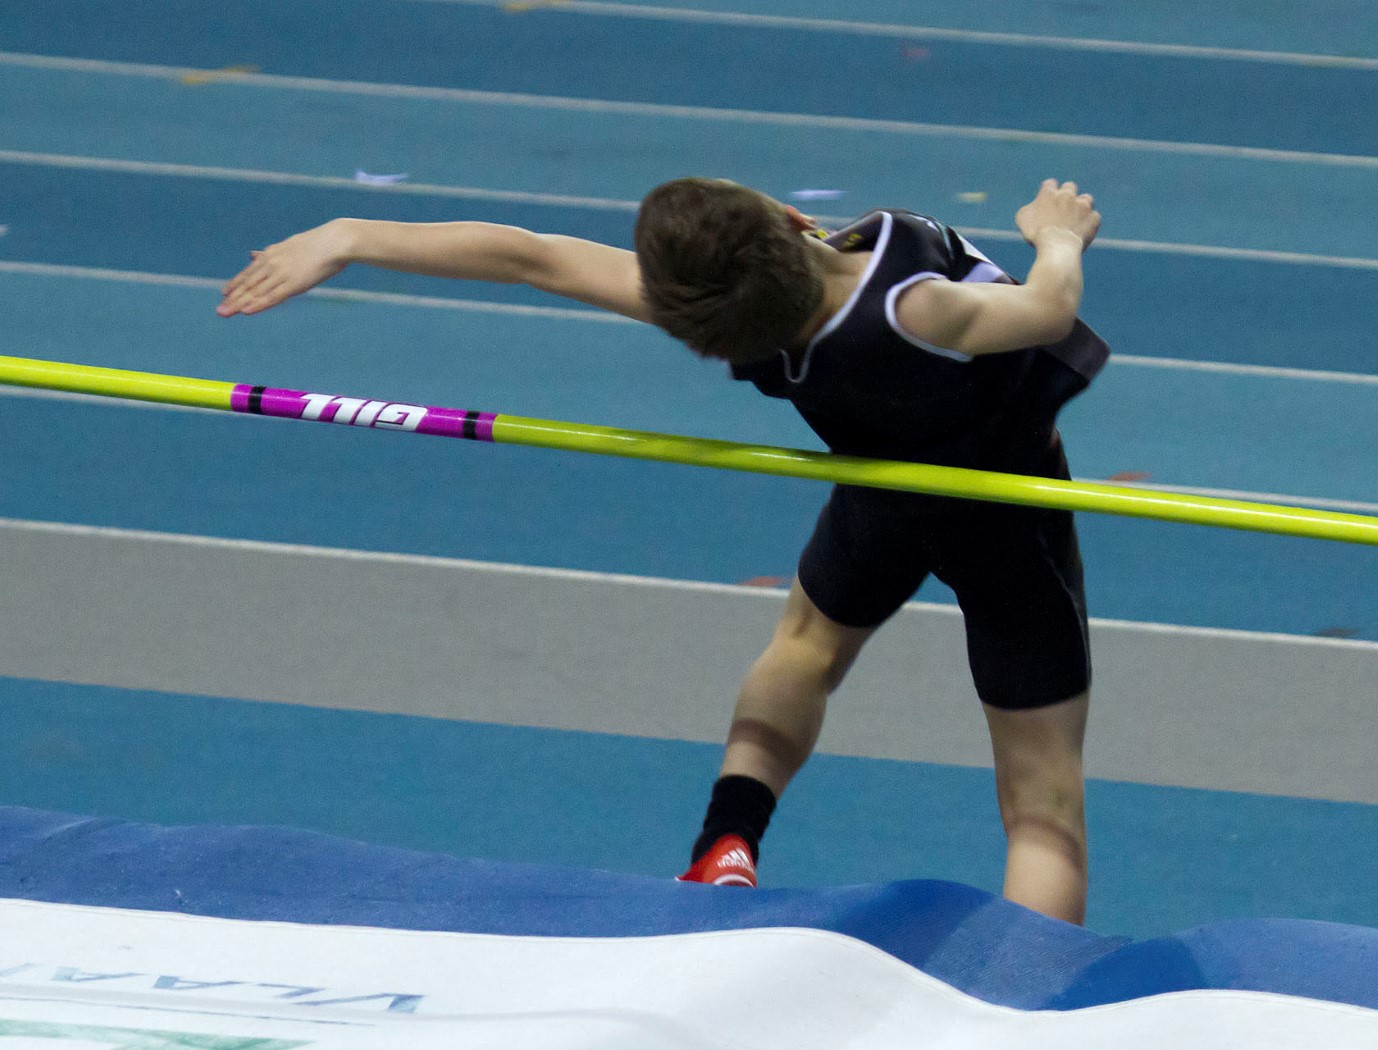 a person on a track holding up a high jump pole